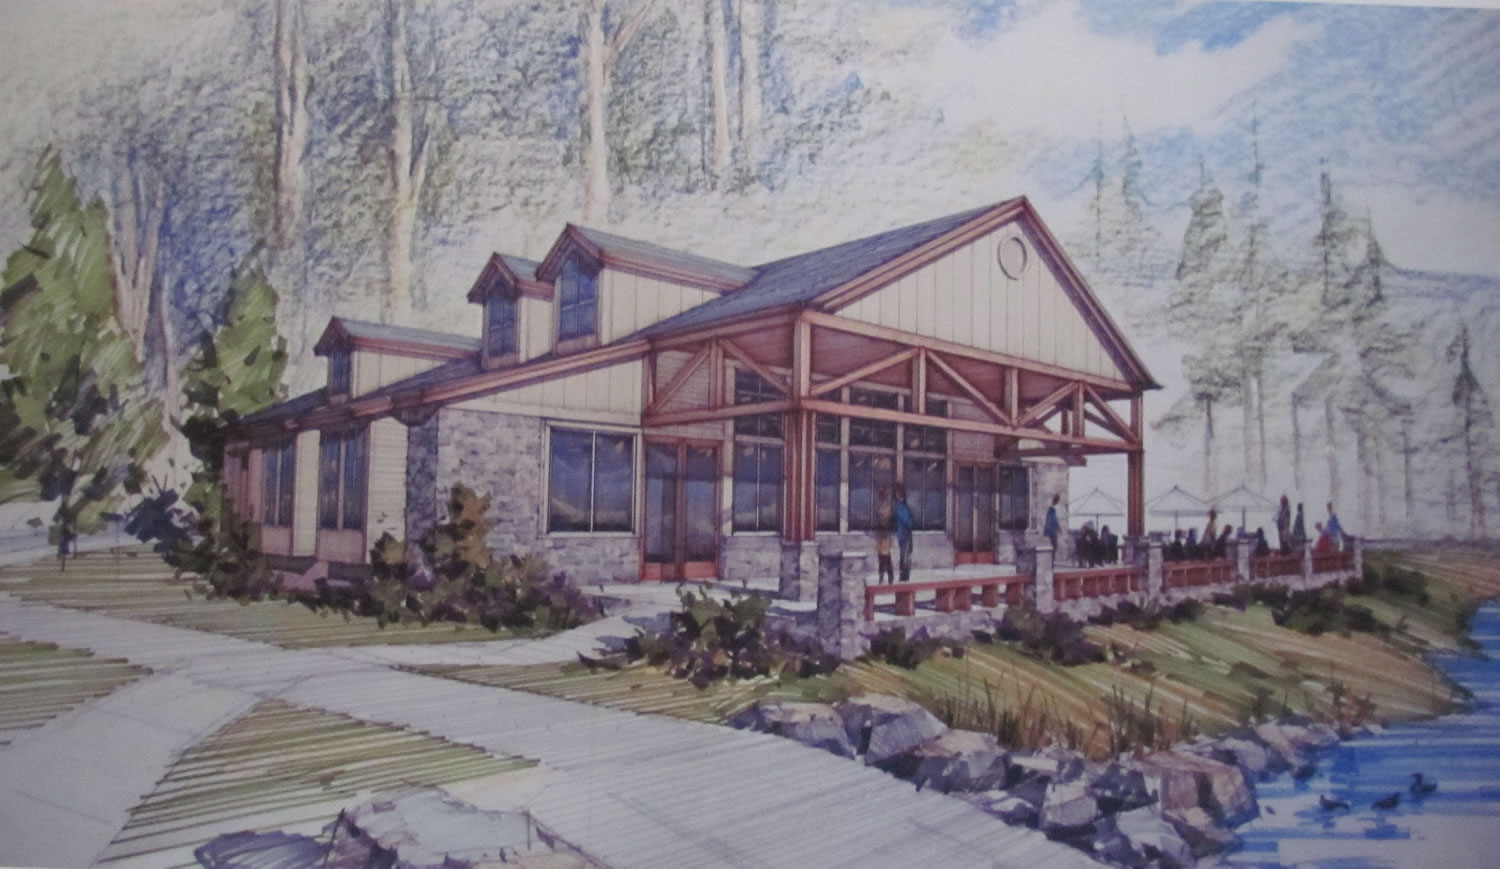 Pictured is an architect's rendering of the proposed Lacamas Lake Lodge and Conference Center, which will be built on the site of the former Camas Moose Lodge.